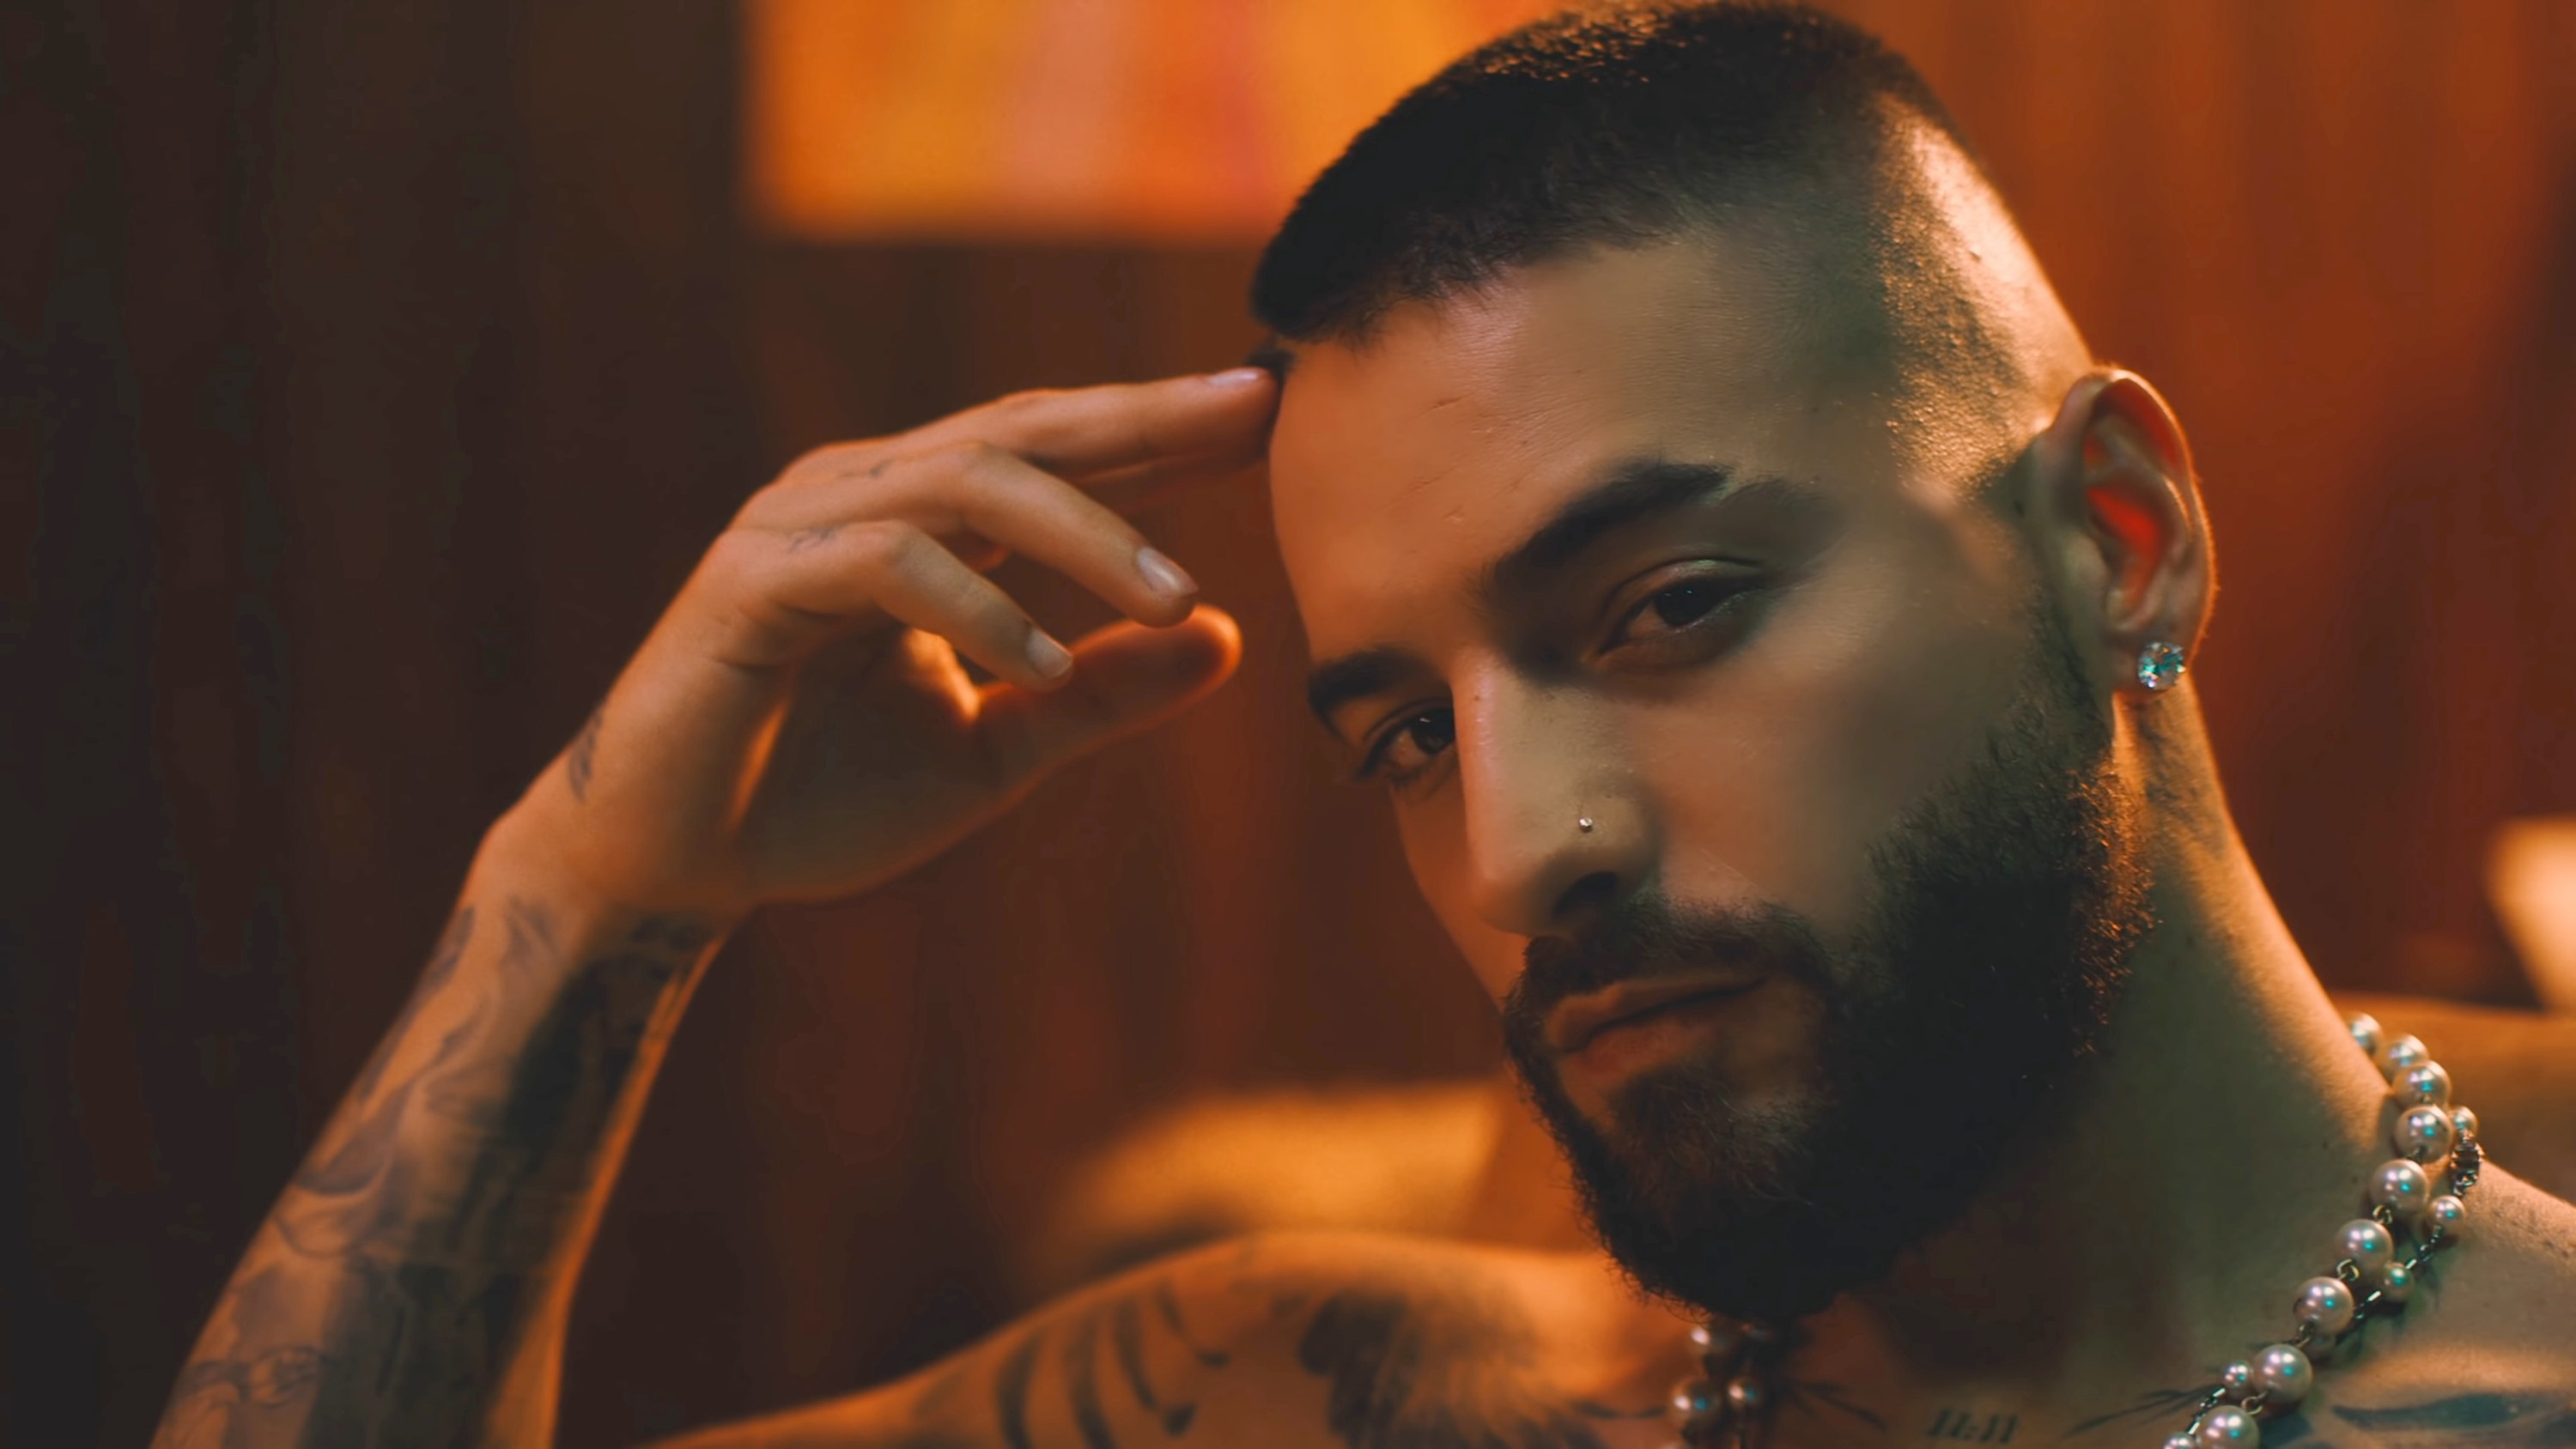 Maluma looking sultry and into the camera while touching his forehead